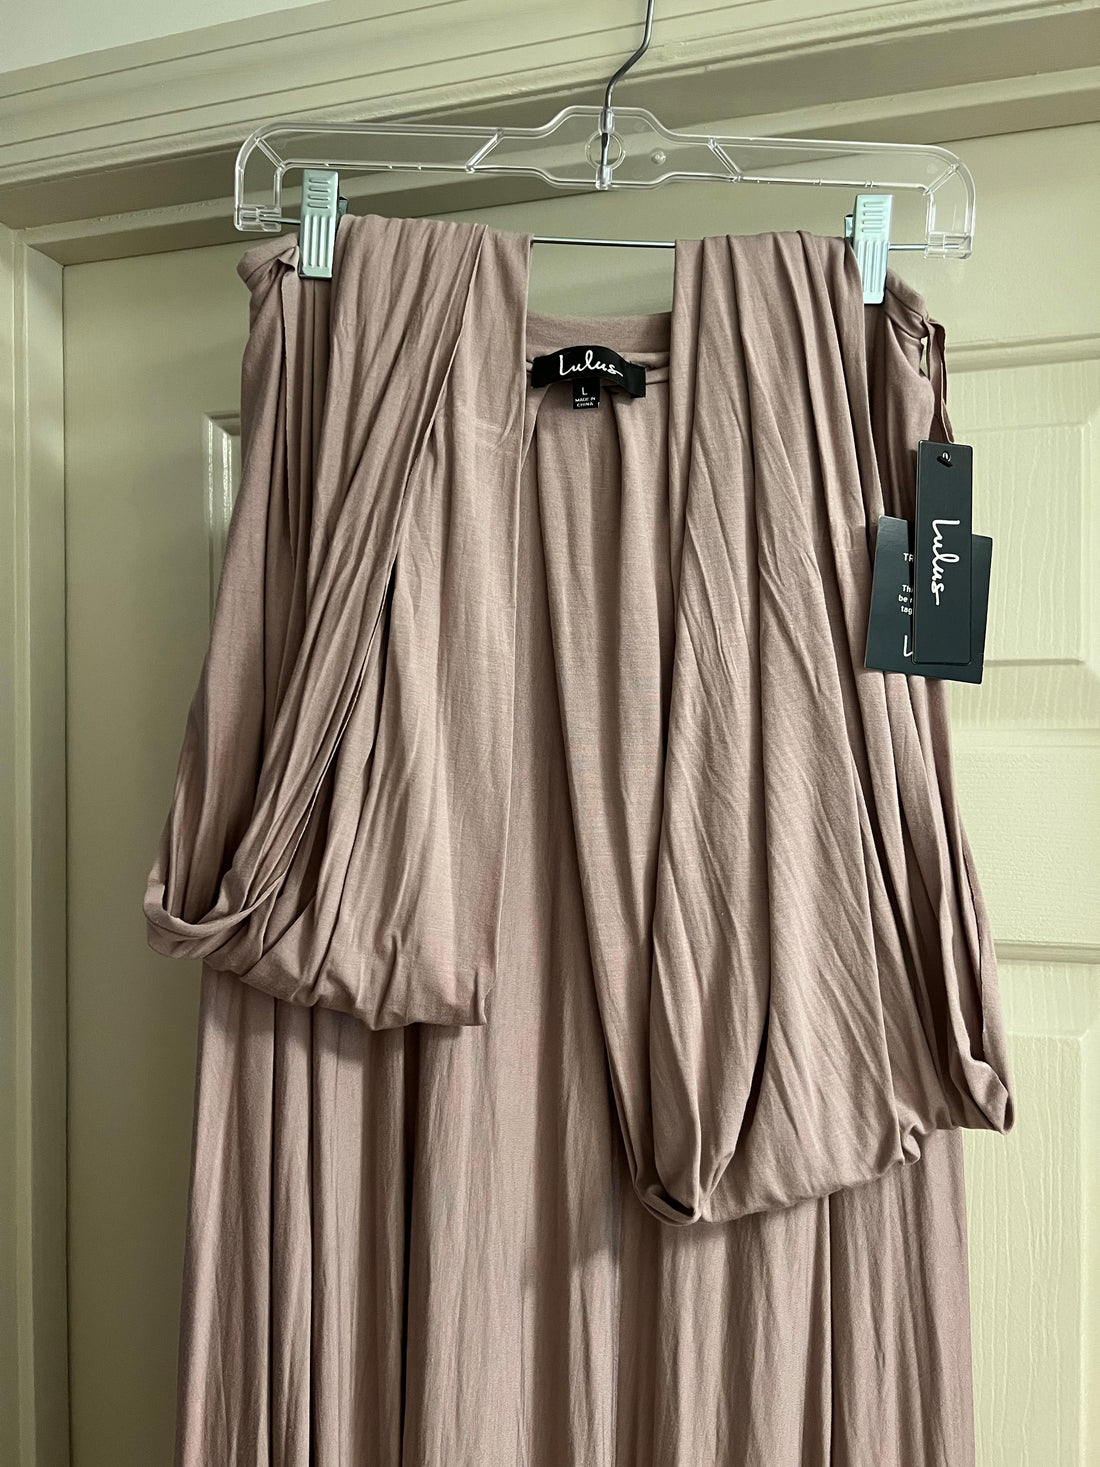 Lulus Tricks of the Trade Taupe Convertible Maxi Dress - L